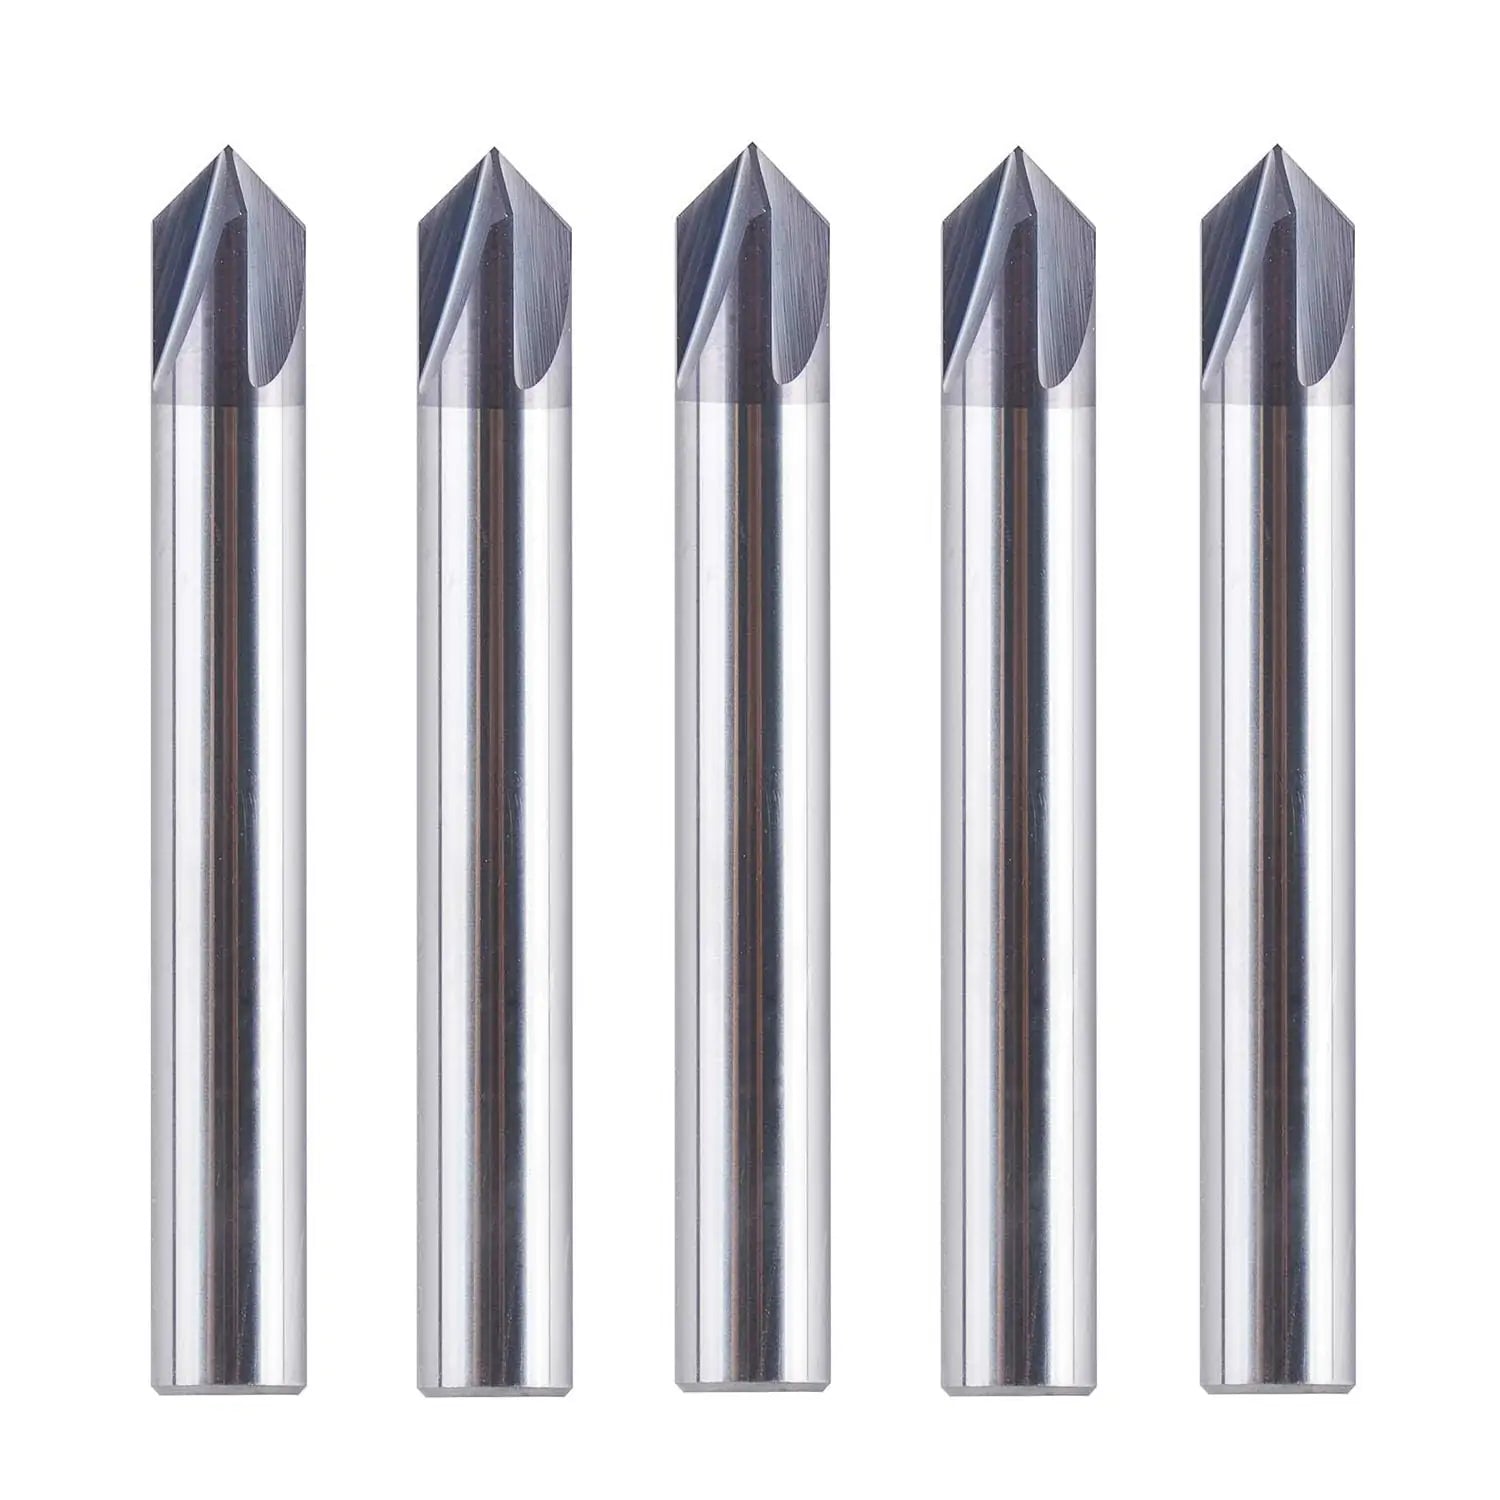 SpeTool W06007 Solid Carbide V Groove 90 Deg 1/4" Dia x 1/4" Shank x 2" Long 4 Flute TiAlN Coated Router Bit